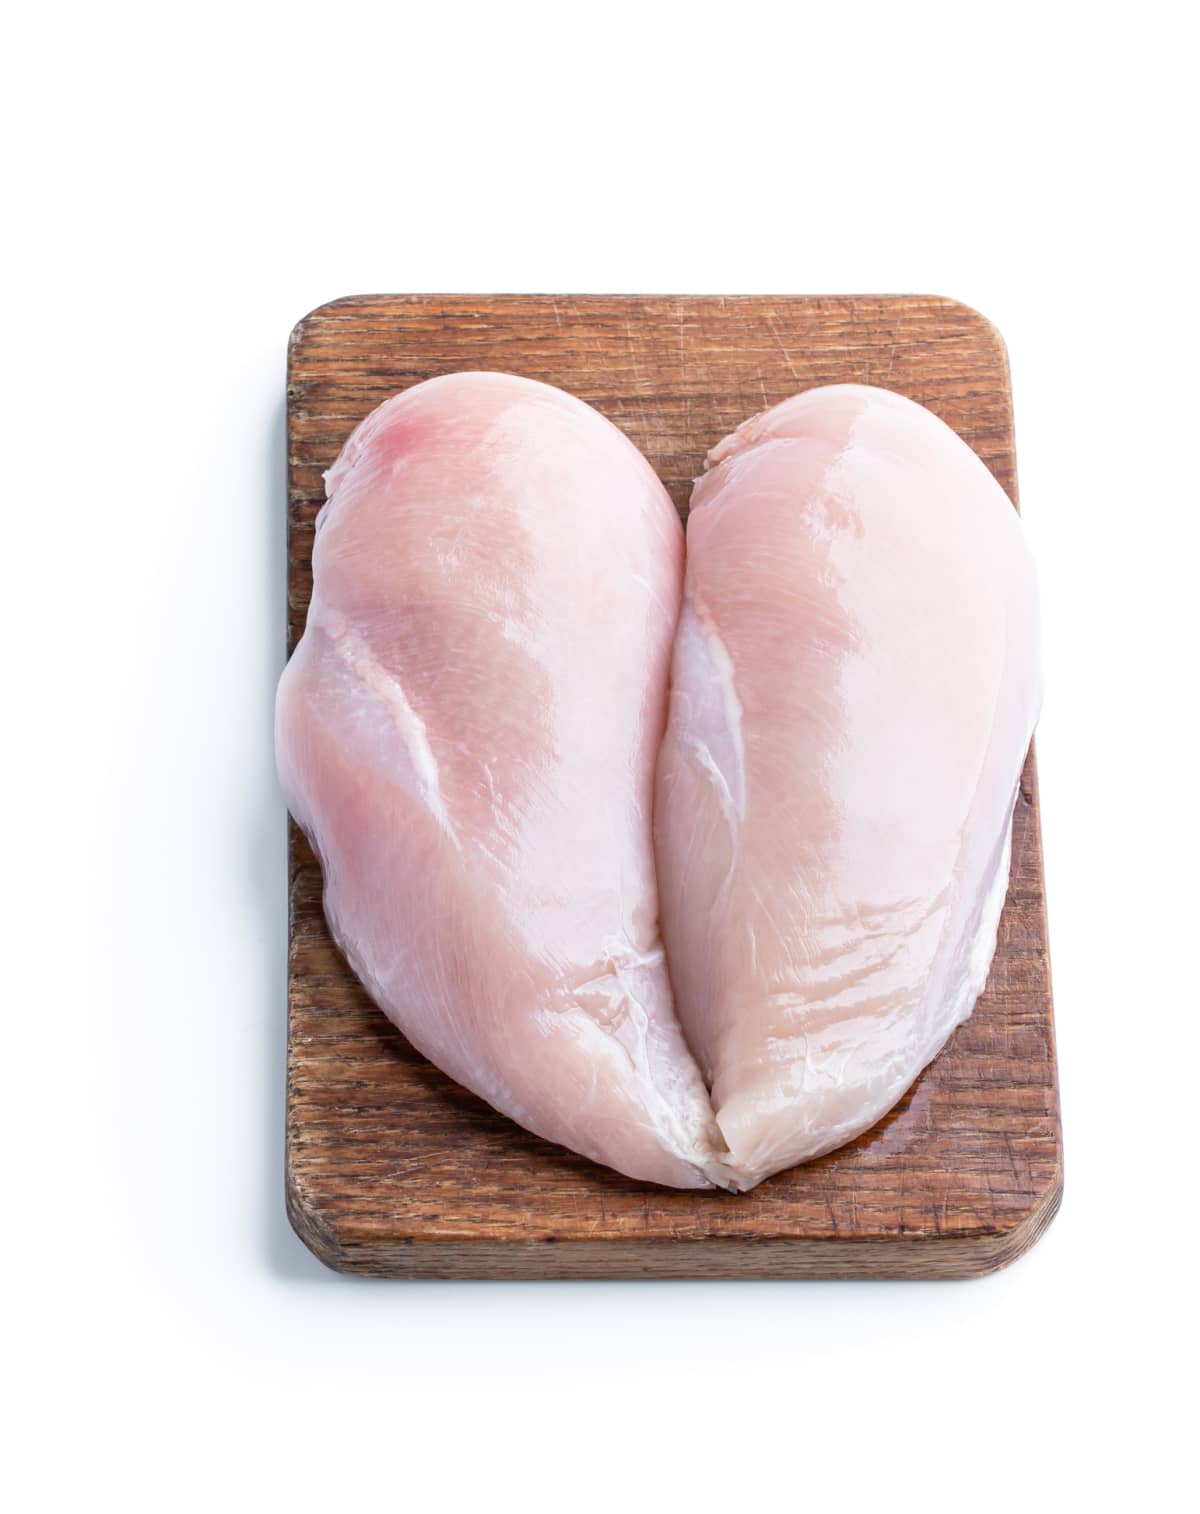 Two raw chicken breasts on a cutting board